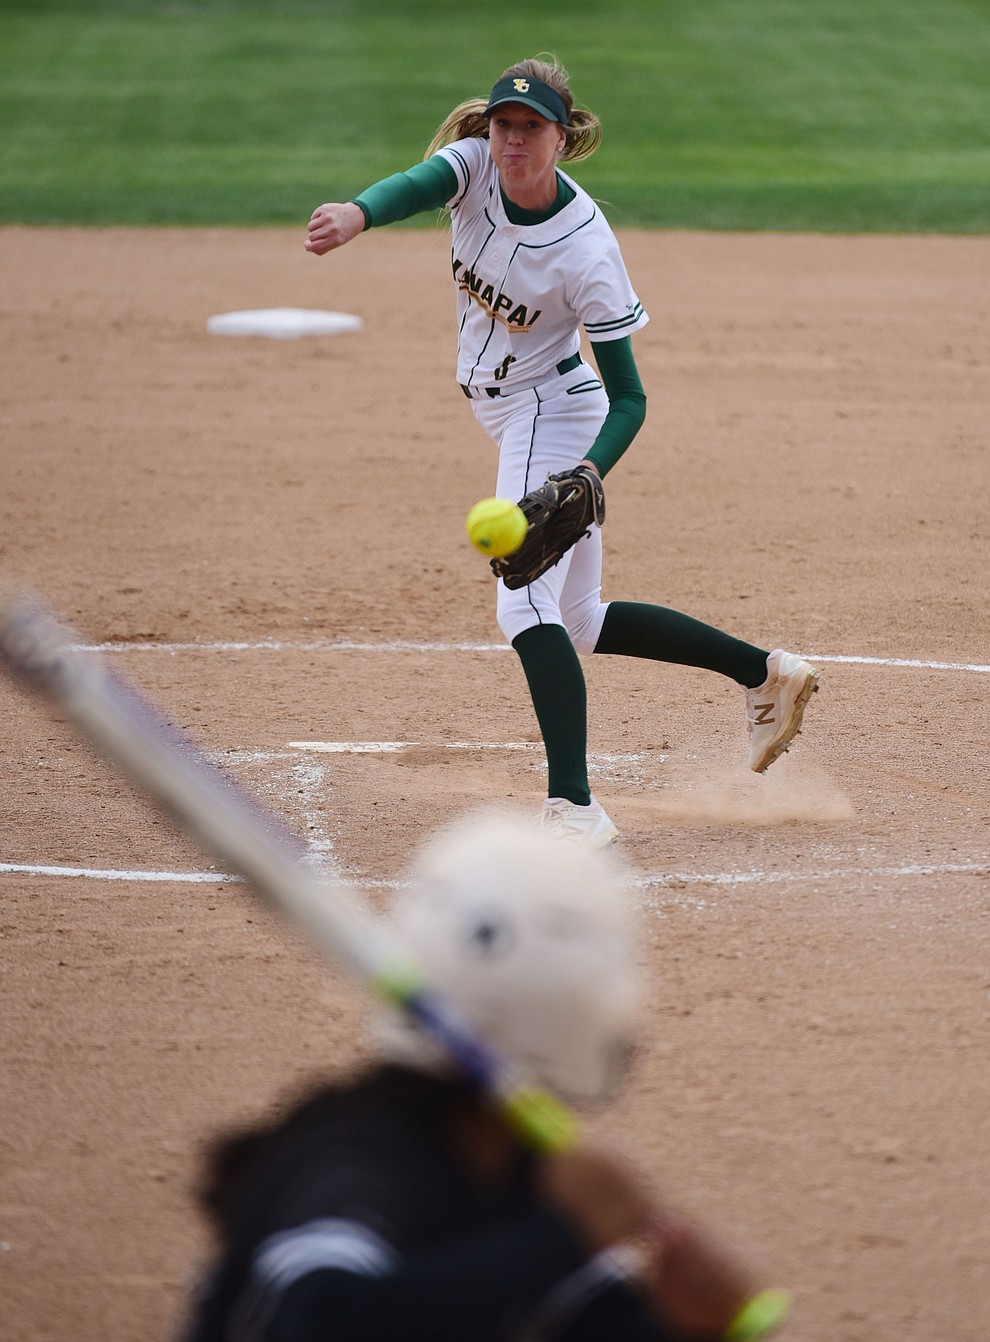 Yavapai's Amy Robinson delivers a pitch  as the Lady Roughriders play Central Arizona in softball Saturday, April 8 in Prescott.  (Les Stukenberg/Courier)